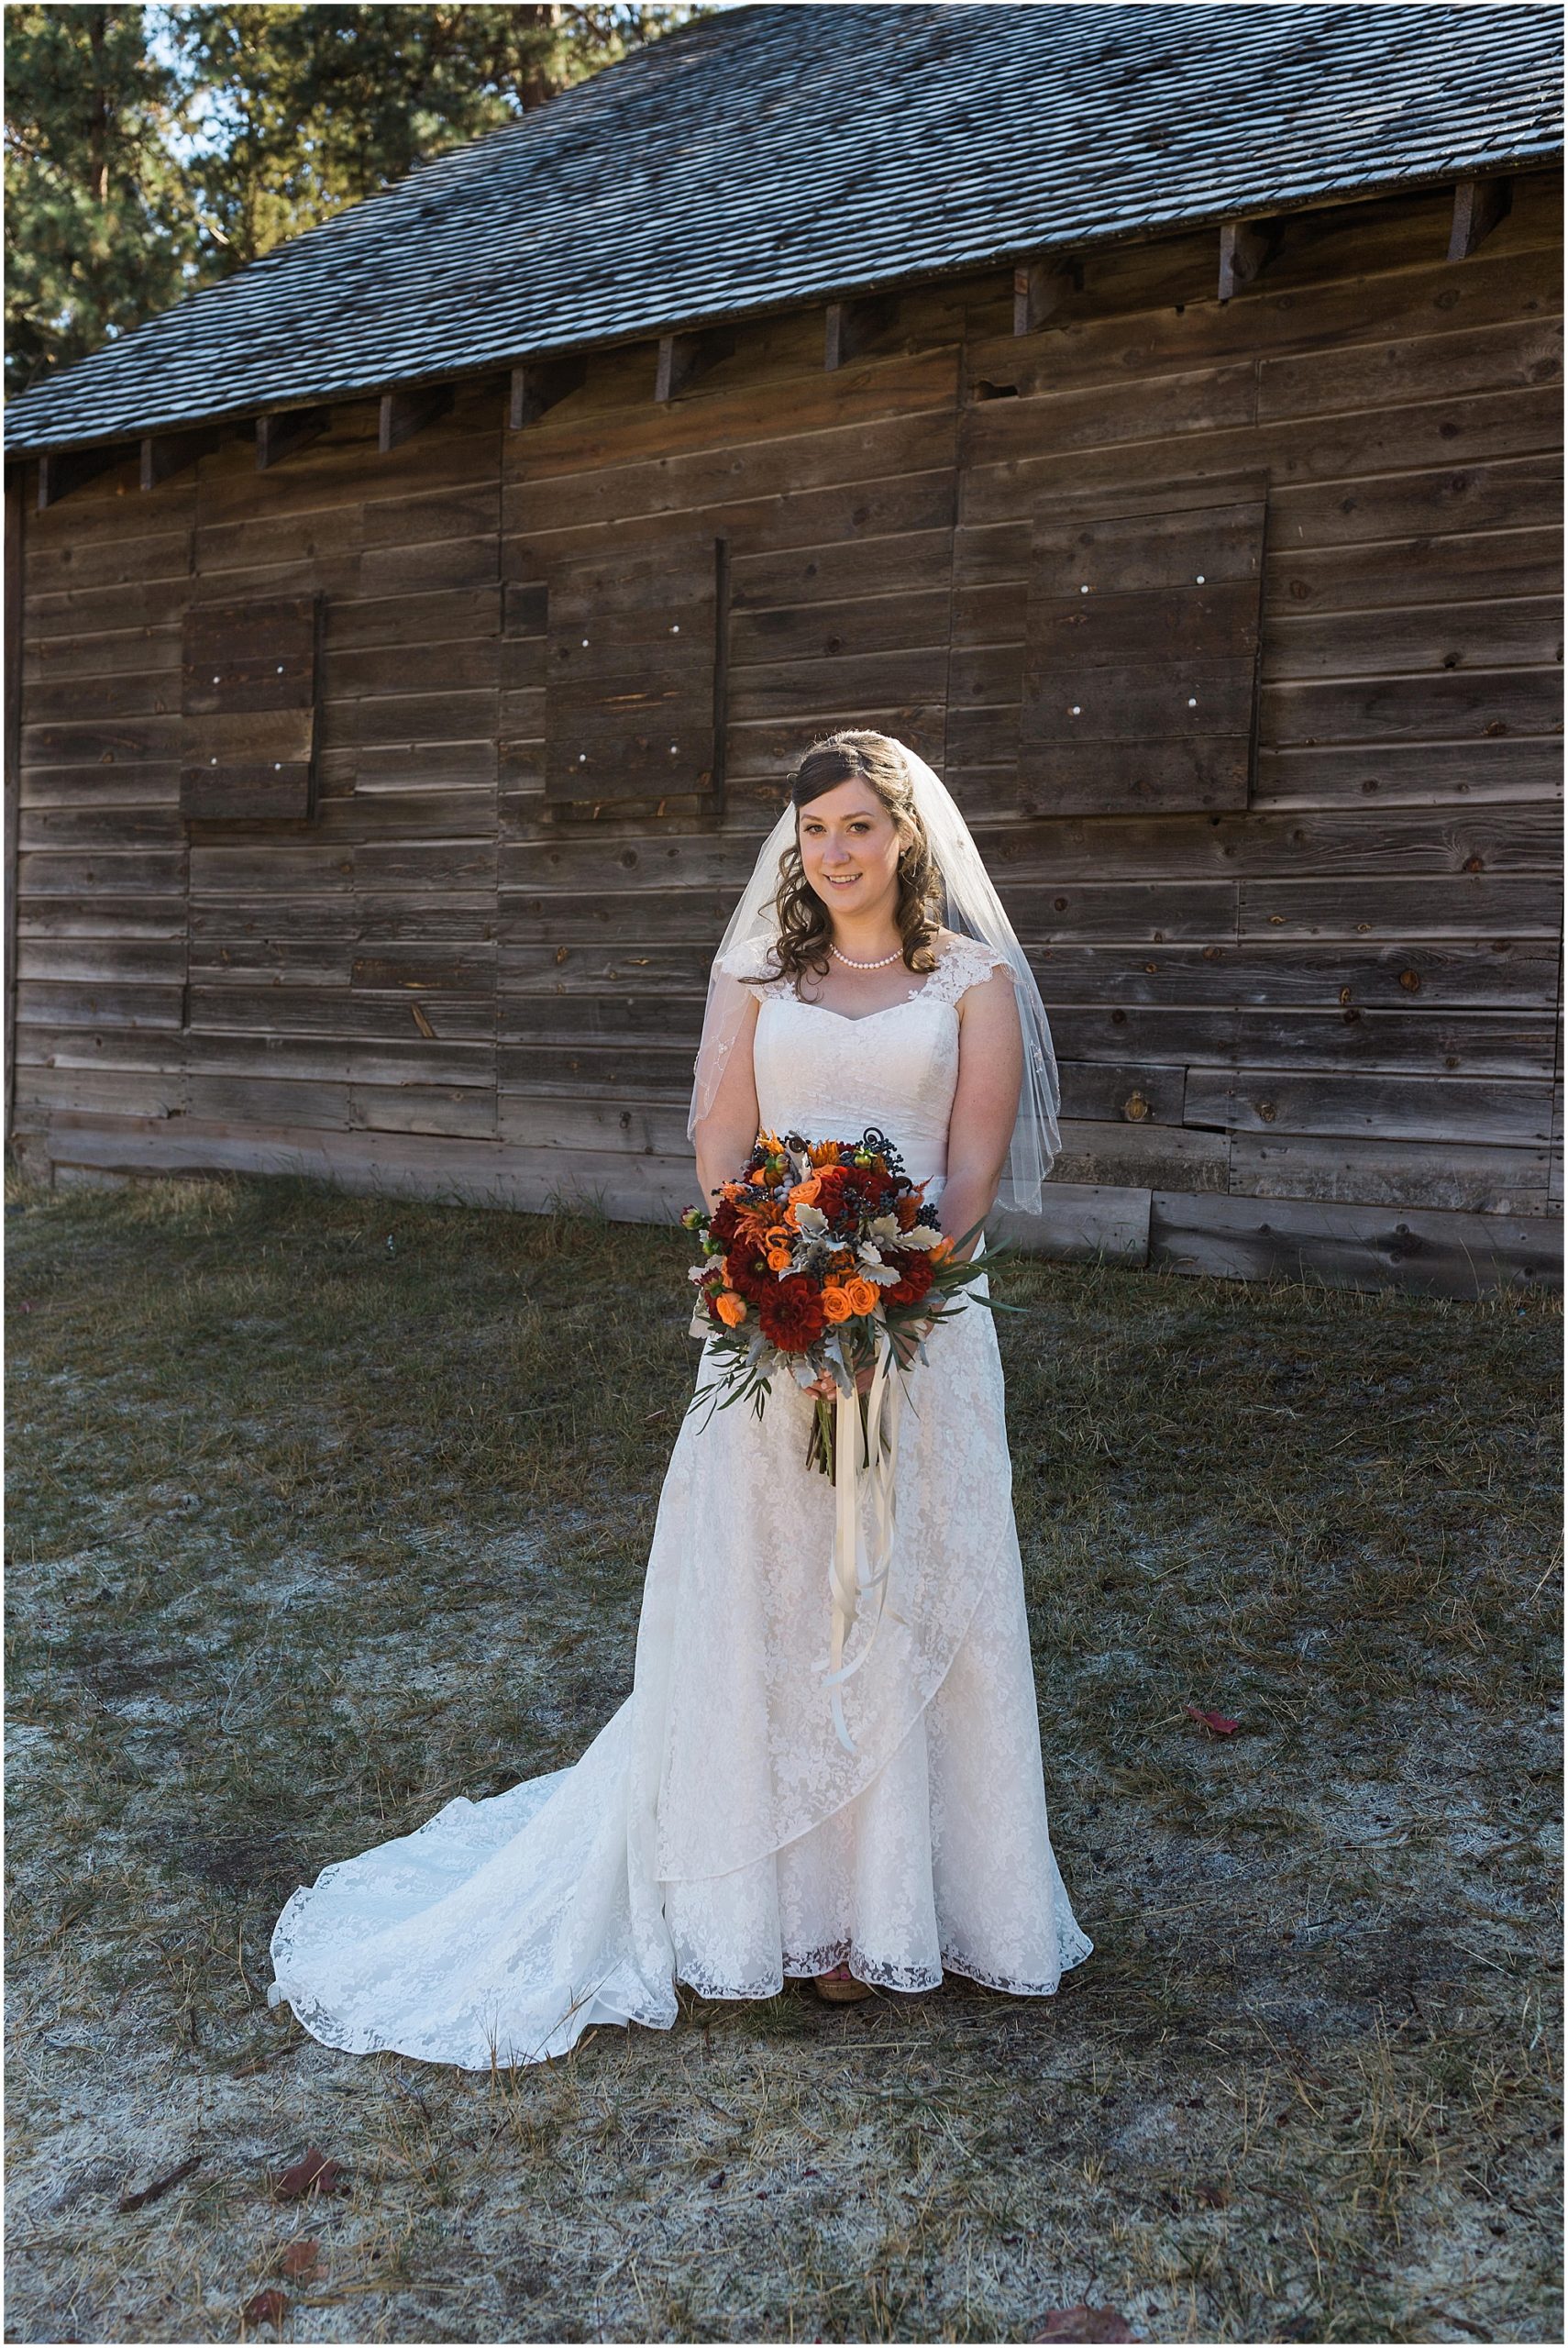 A bride poses for a bridal portrait at her Hollinshead Barn Fall Wedding in Bend, OR. | Erica Swantek Photography